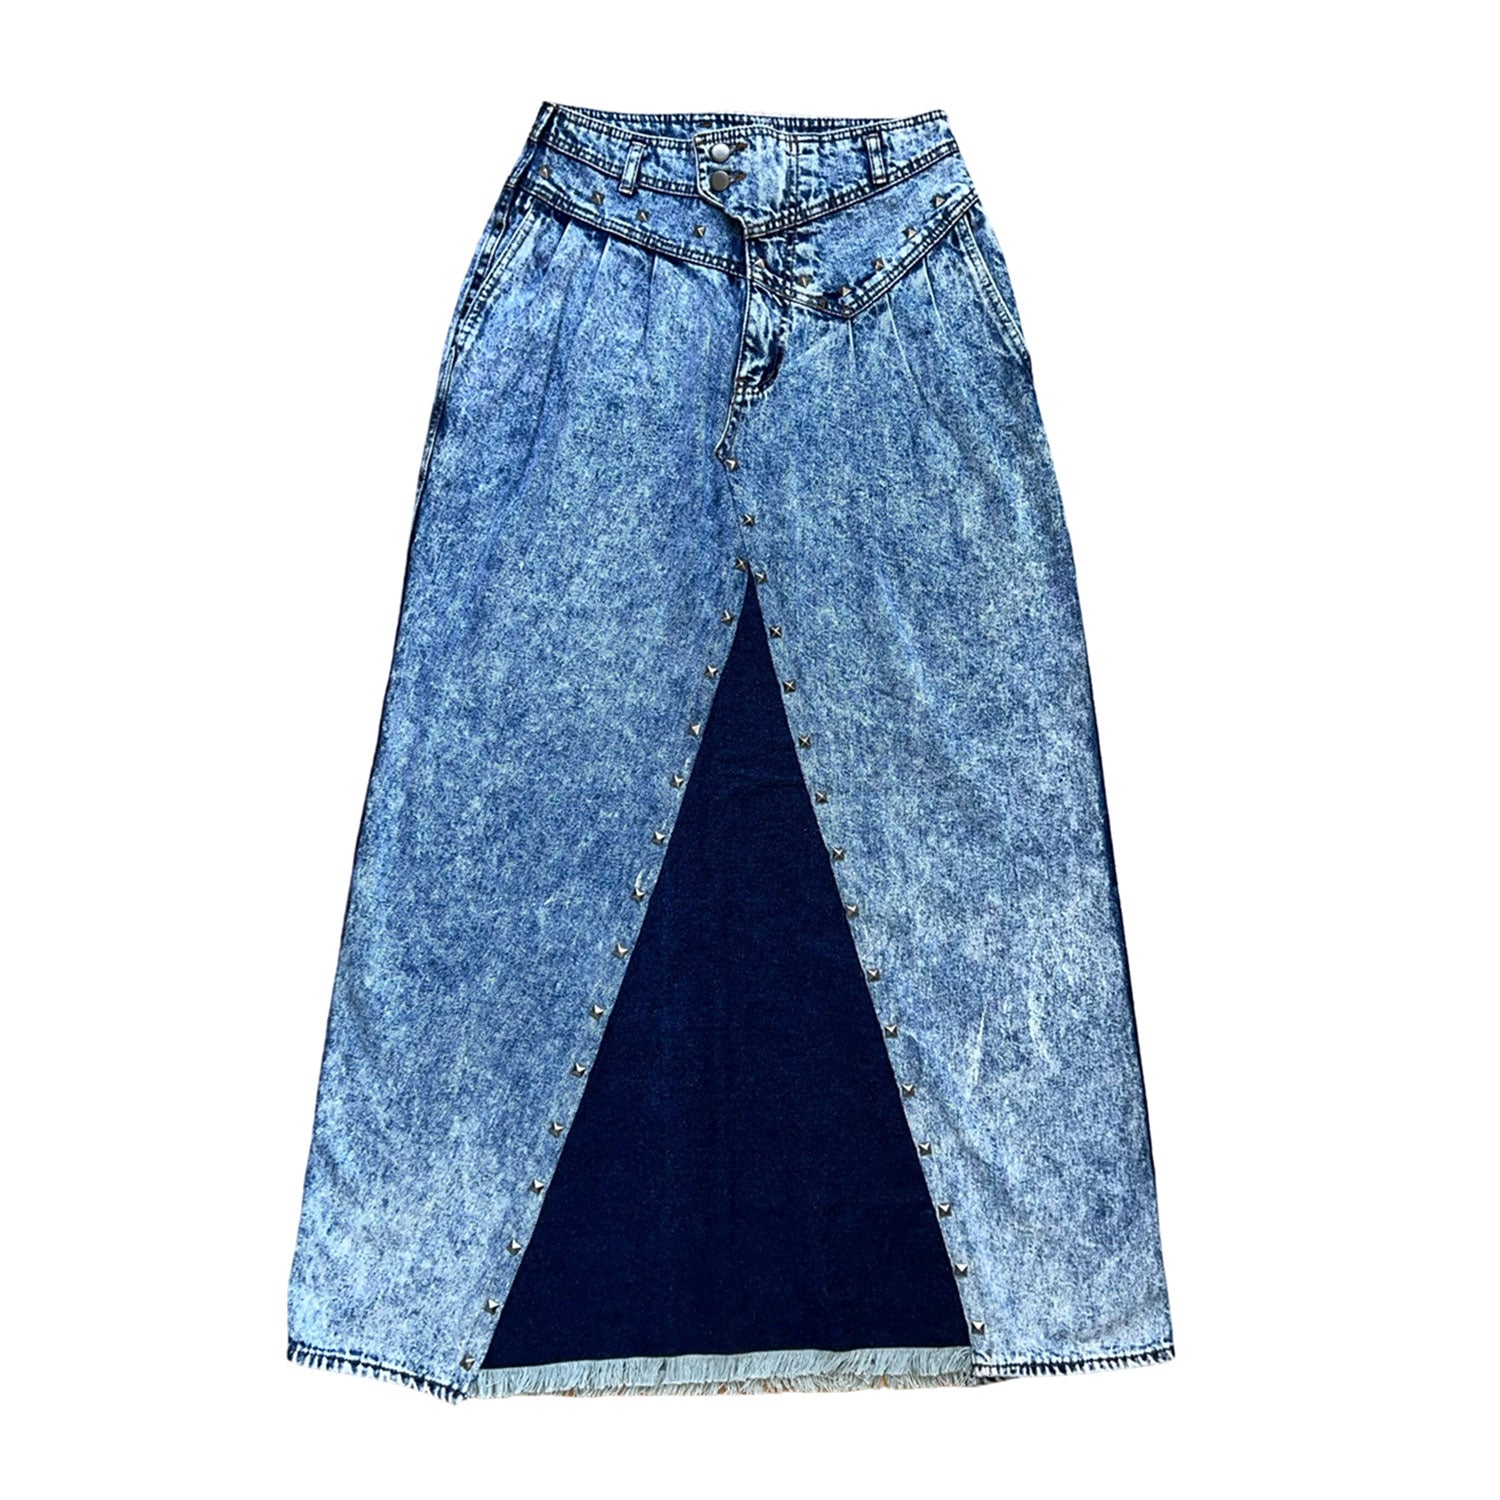 Blue Denim Skirt with Silver Studded Buttons